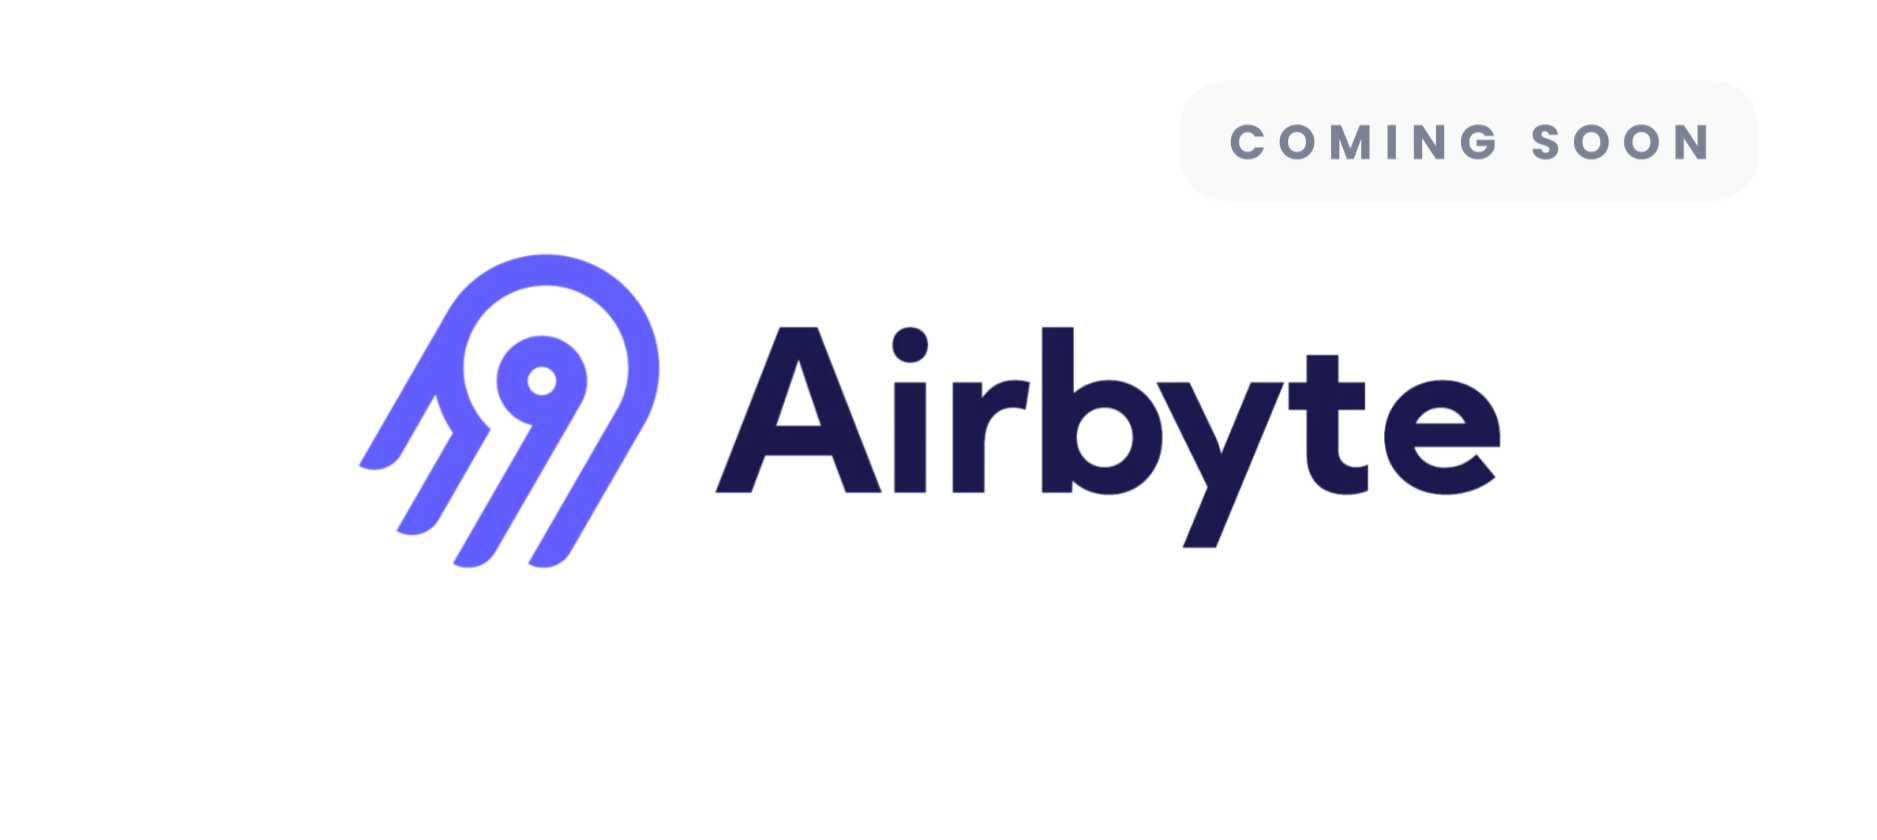 Transformation - Airbyte - Coming soon